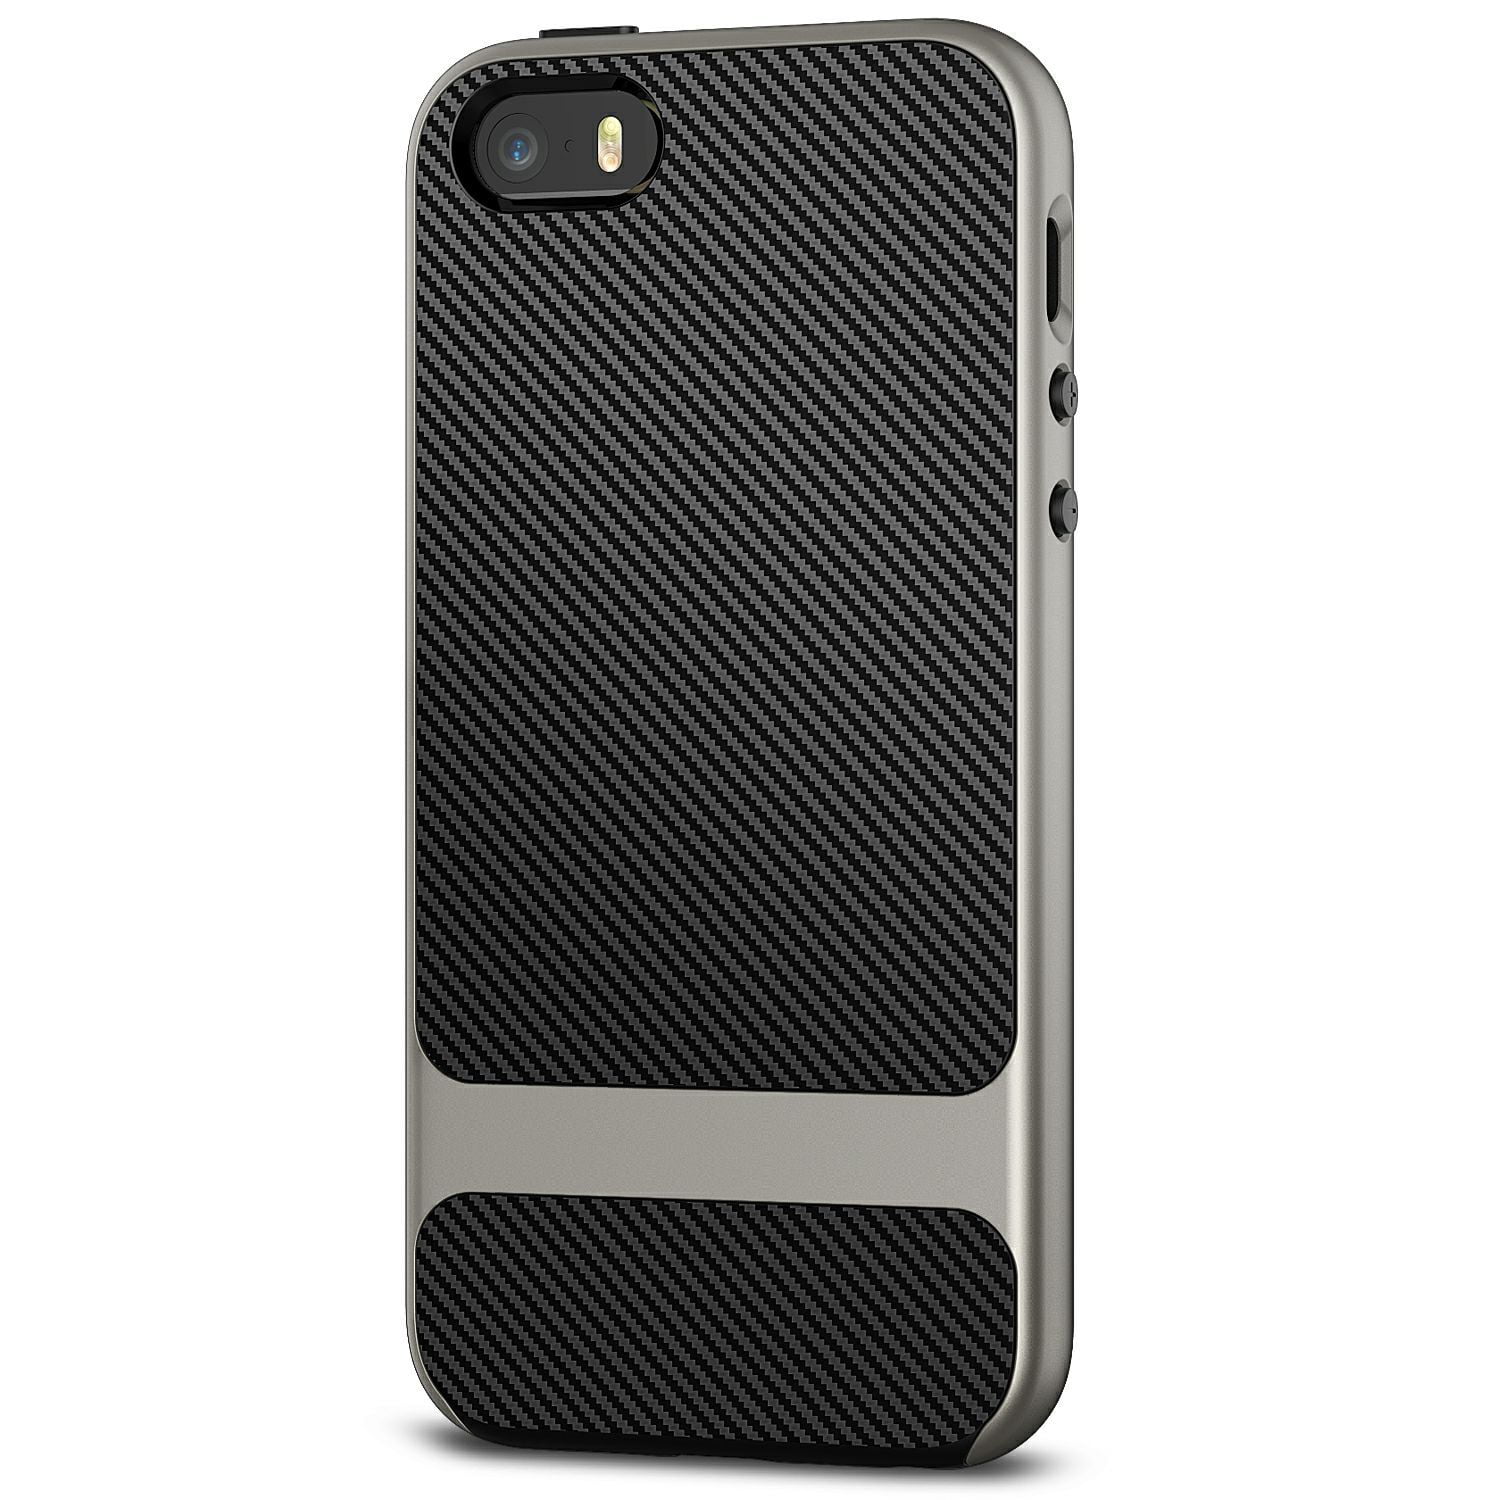 Fourth details Person in charge iPhone 5s Case, JETech iPhone SE 5s 5 Two-Layer Slim Protective Case Cover  with Shock-Absorption and Carbon Fiber for Apple iPhone SE iPhone 5s iPhone  5 (Grey) - Walmart.com